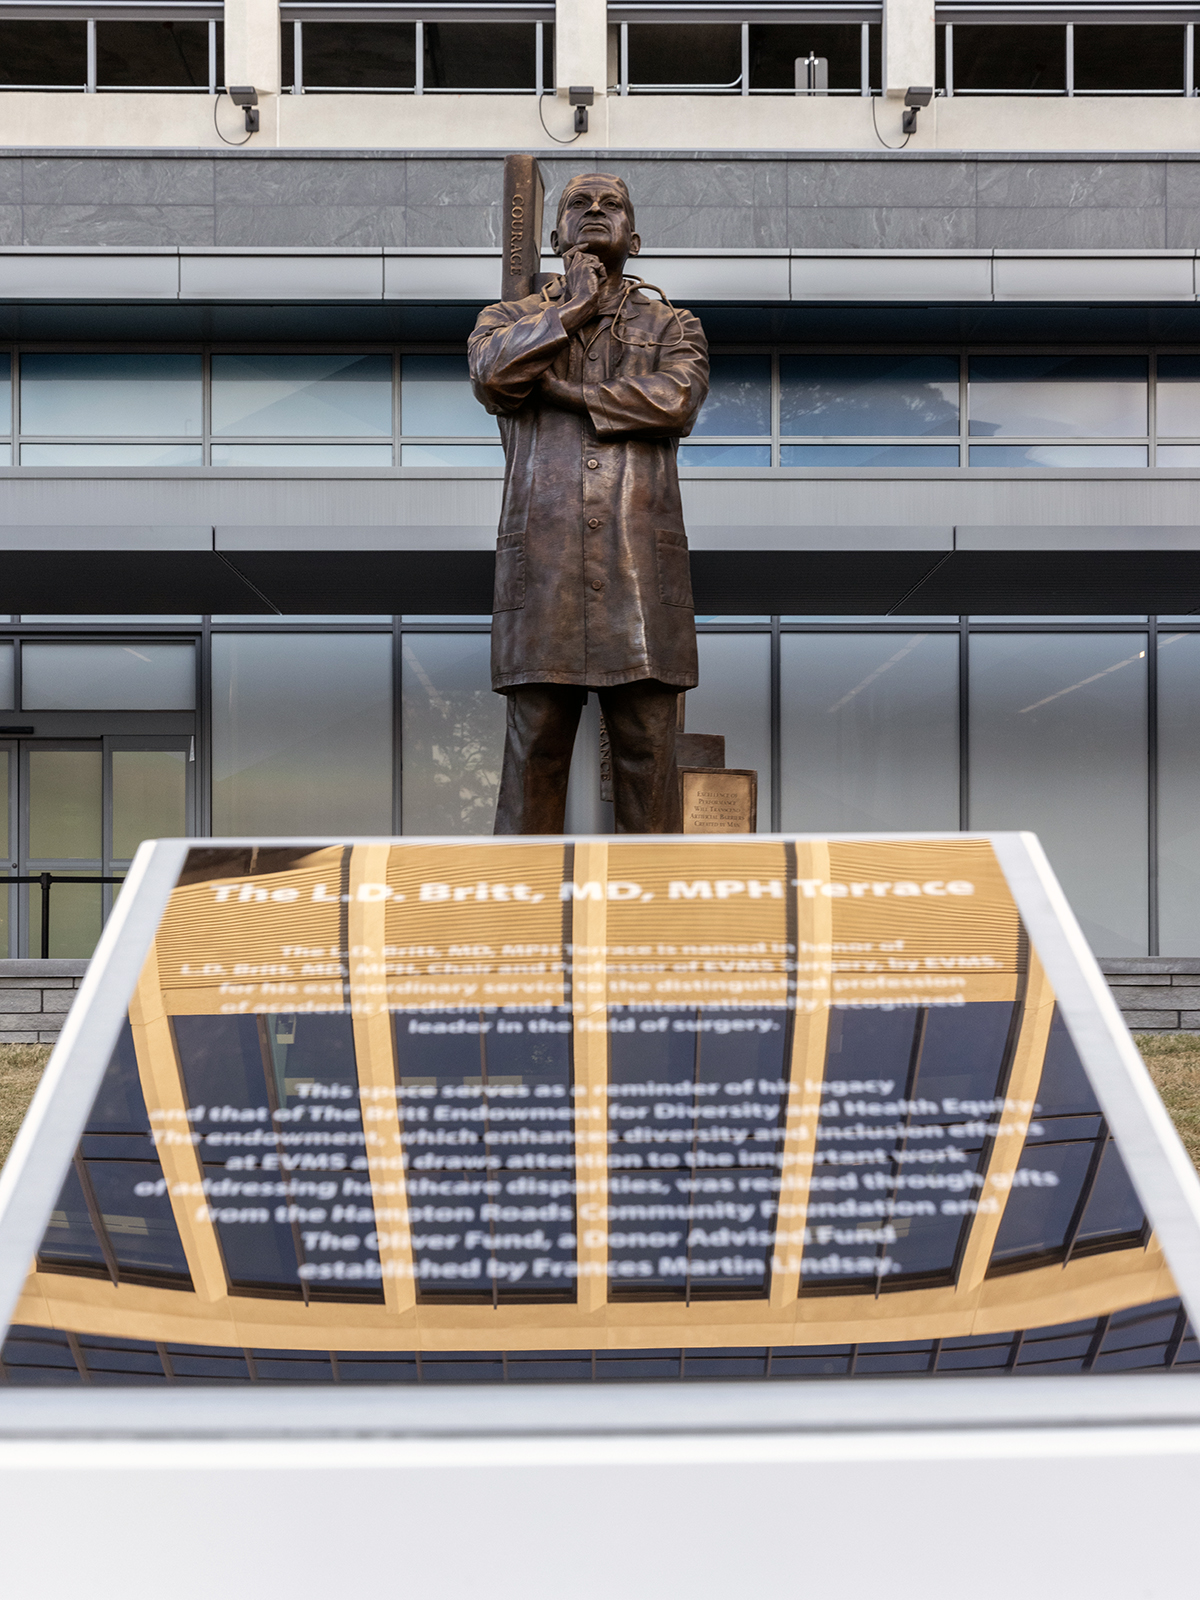 Picture of bronze statue in front of Waitzer Hall